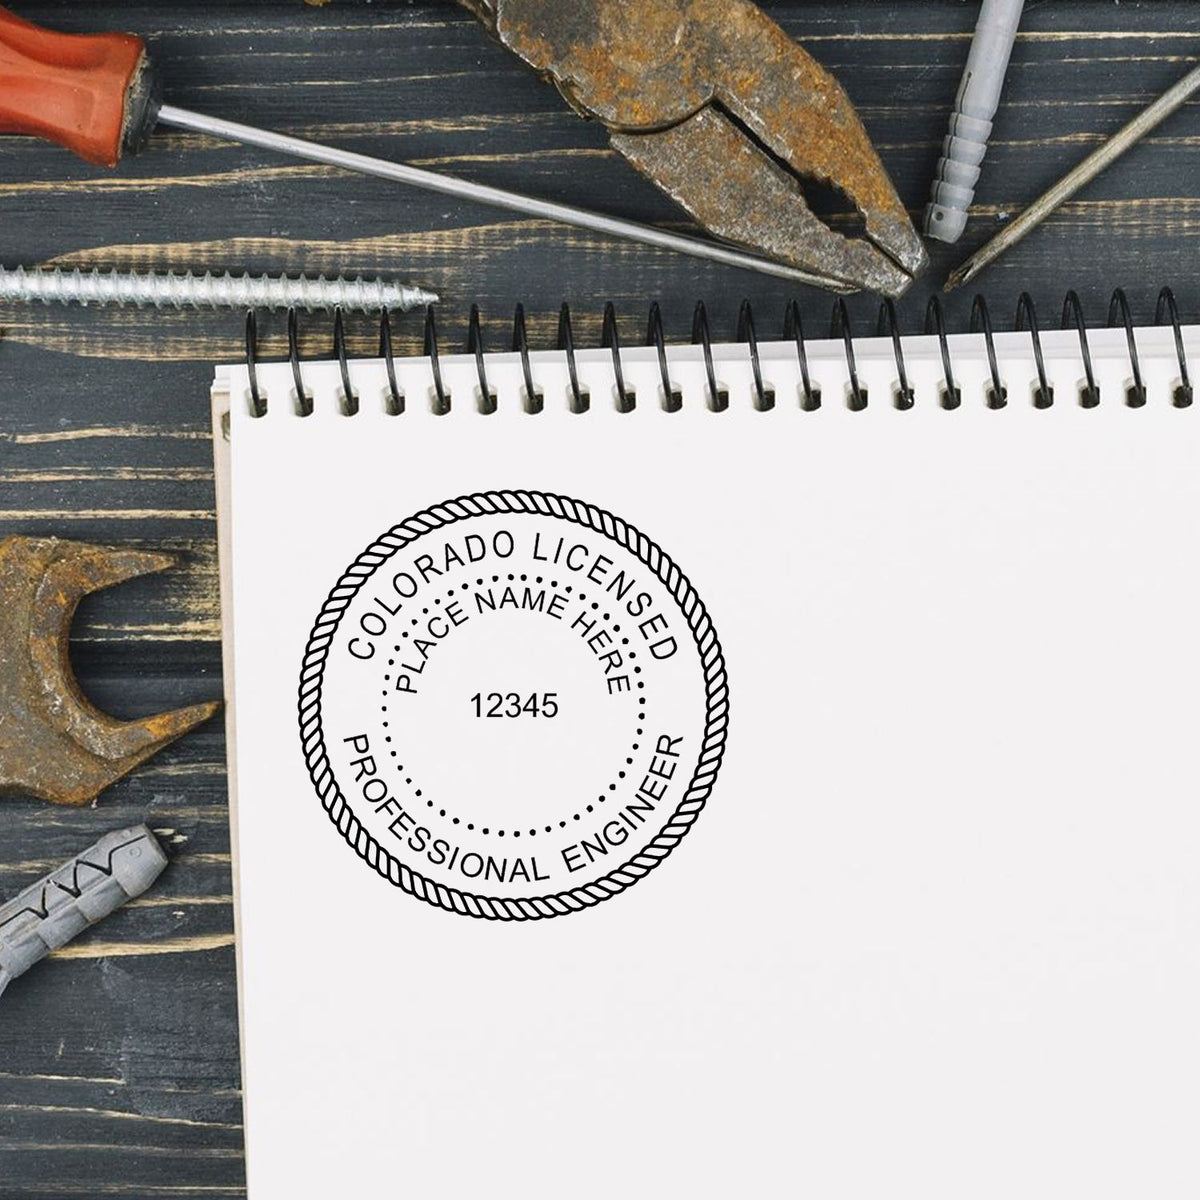 A photograph of the Colorado Professional Engineer Seal Stamp stamp impression reveals a vivid, professional image of the on paper.